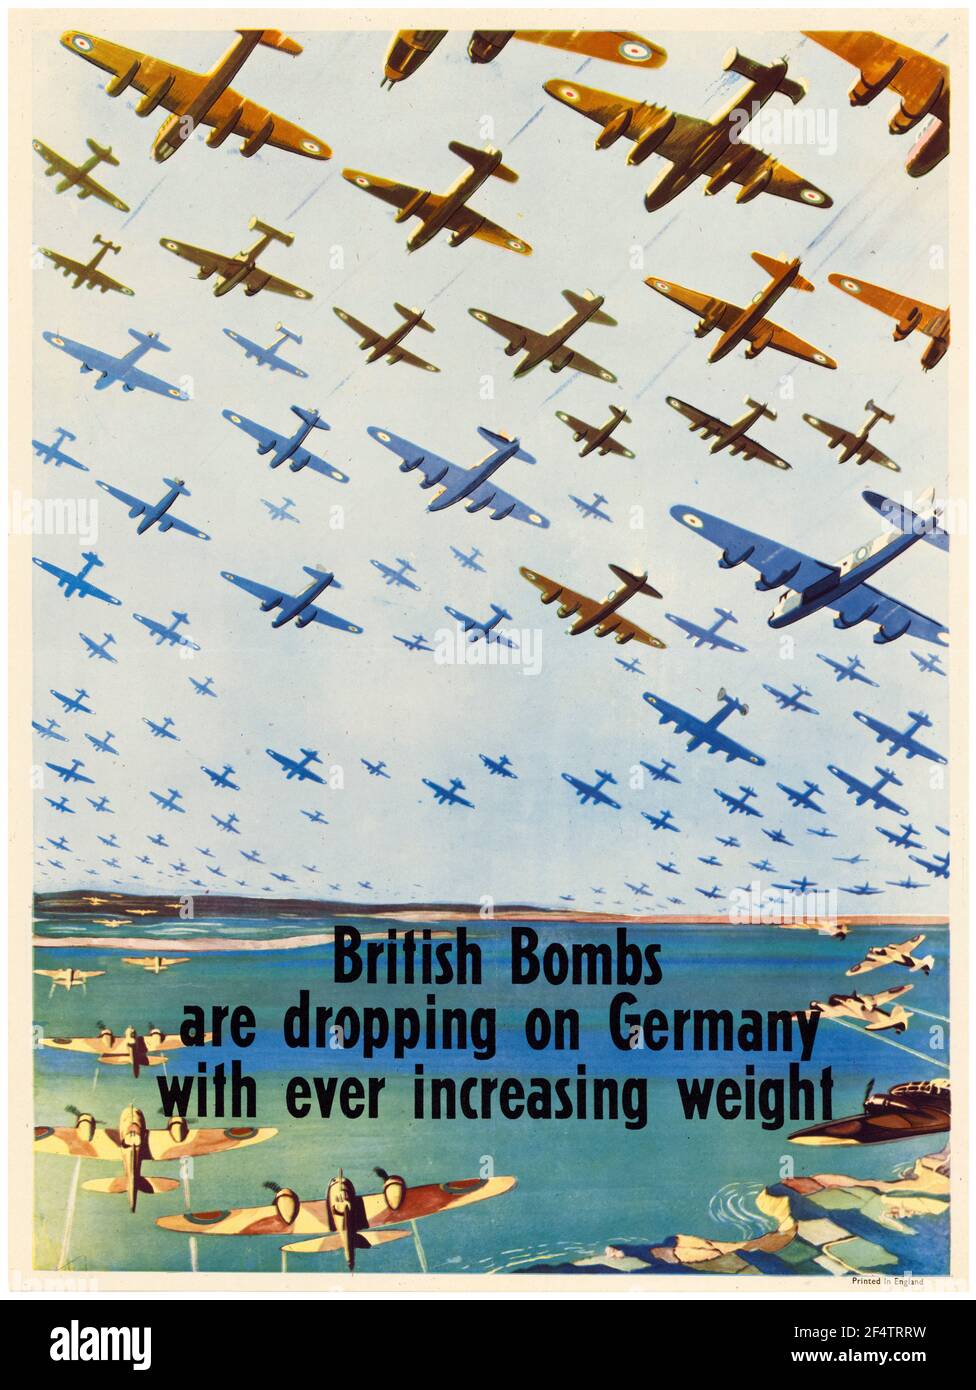 WW2, British Bombs are Dropping on Germany With Ever Increasing Weight (Bomber Aircraft on Bombing Raid), motivational poster, 1942-1945 Stock Photo